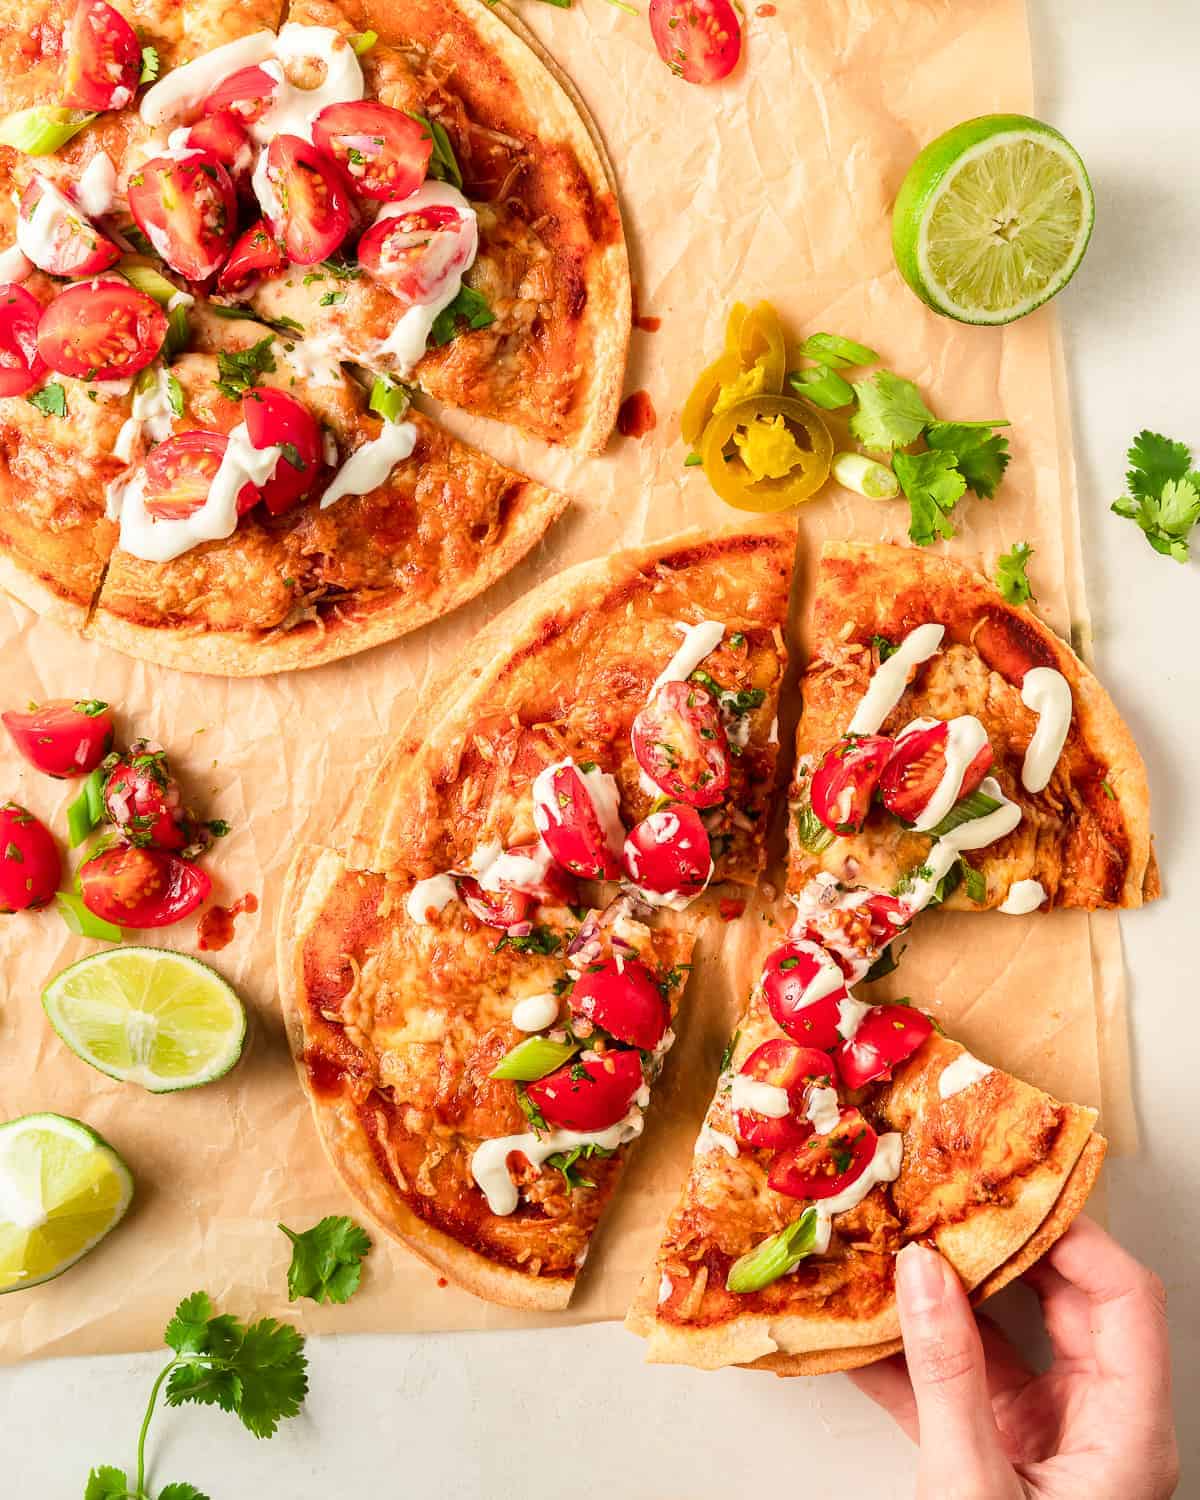 A slice of Mexican pizza